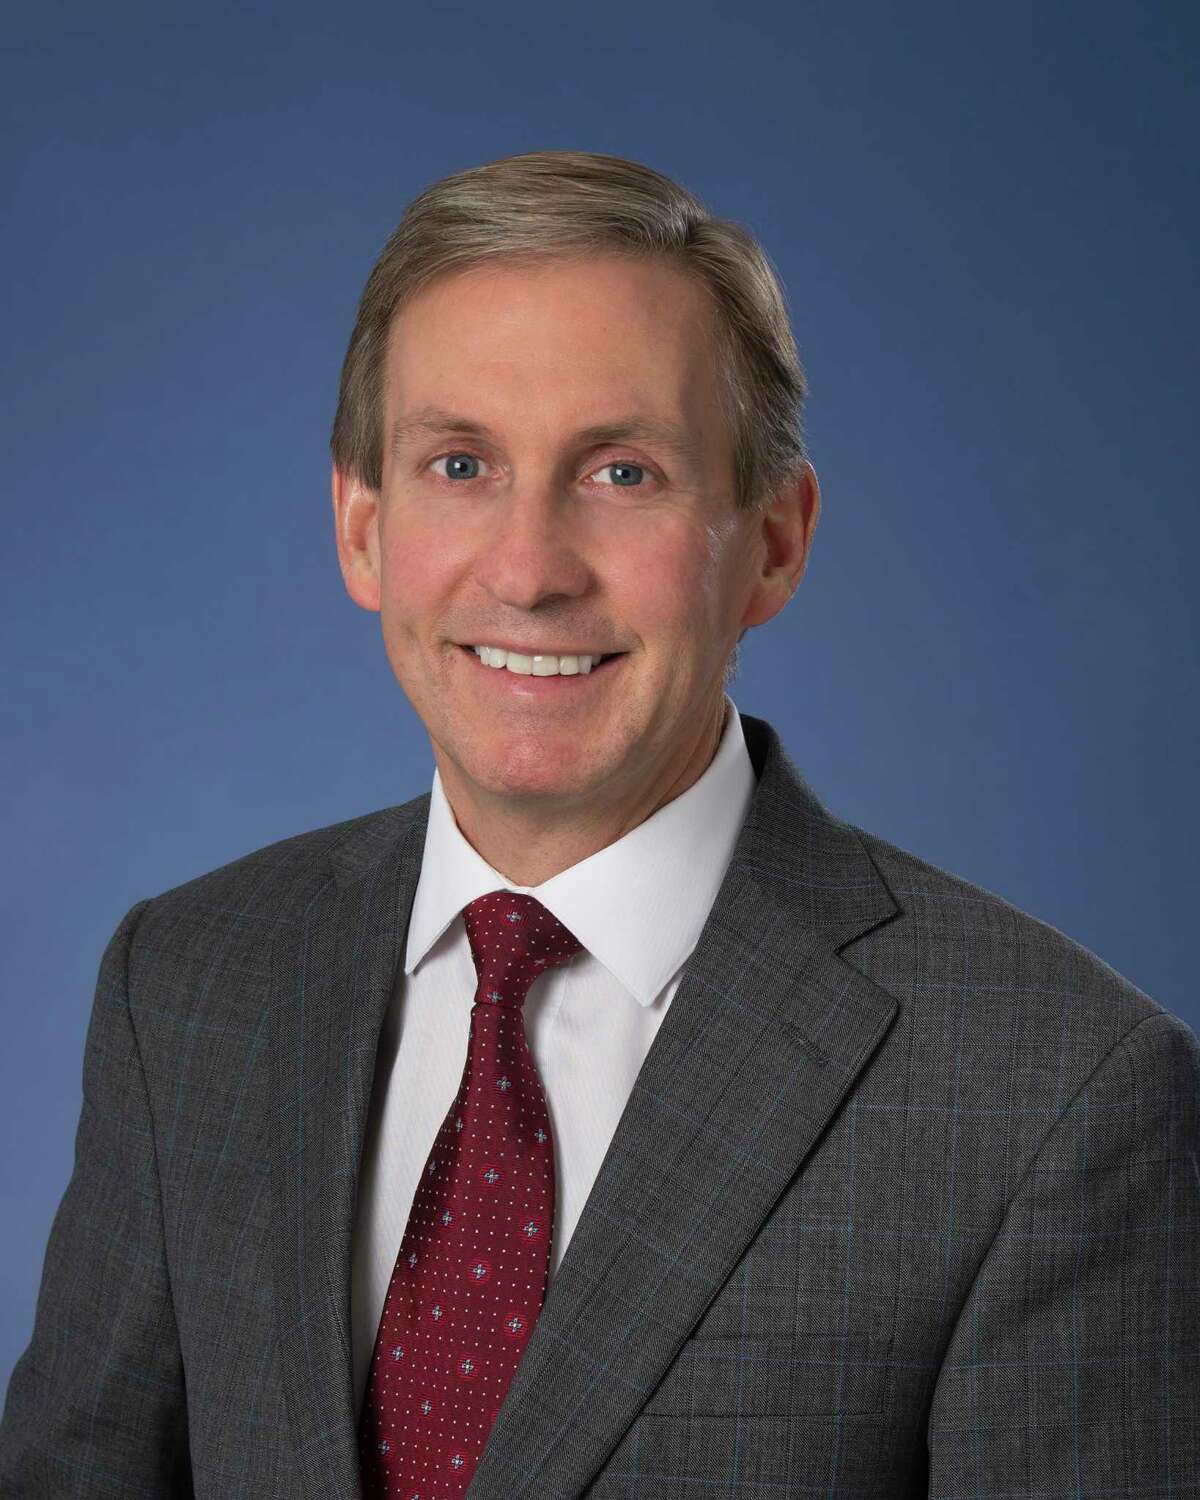 Peter Pisters will become the fifth president of MD Anderson. He currently is president and CEO of University Health Network in Toronto.